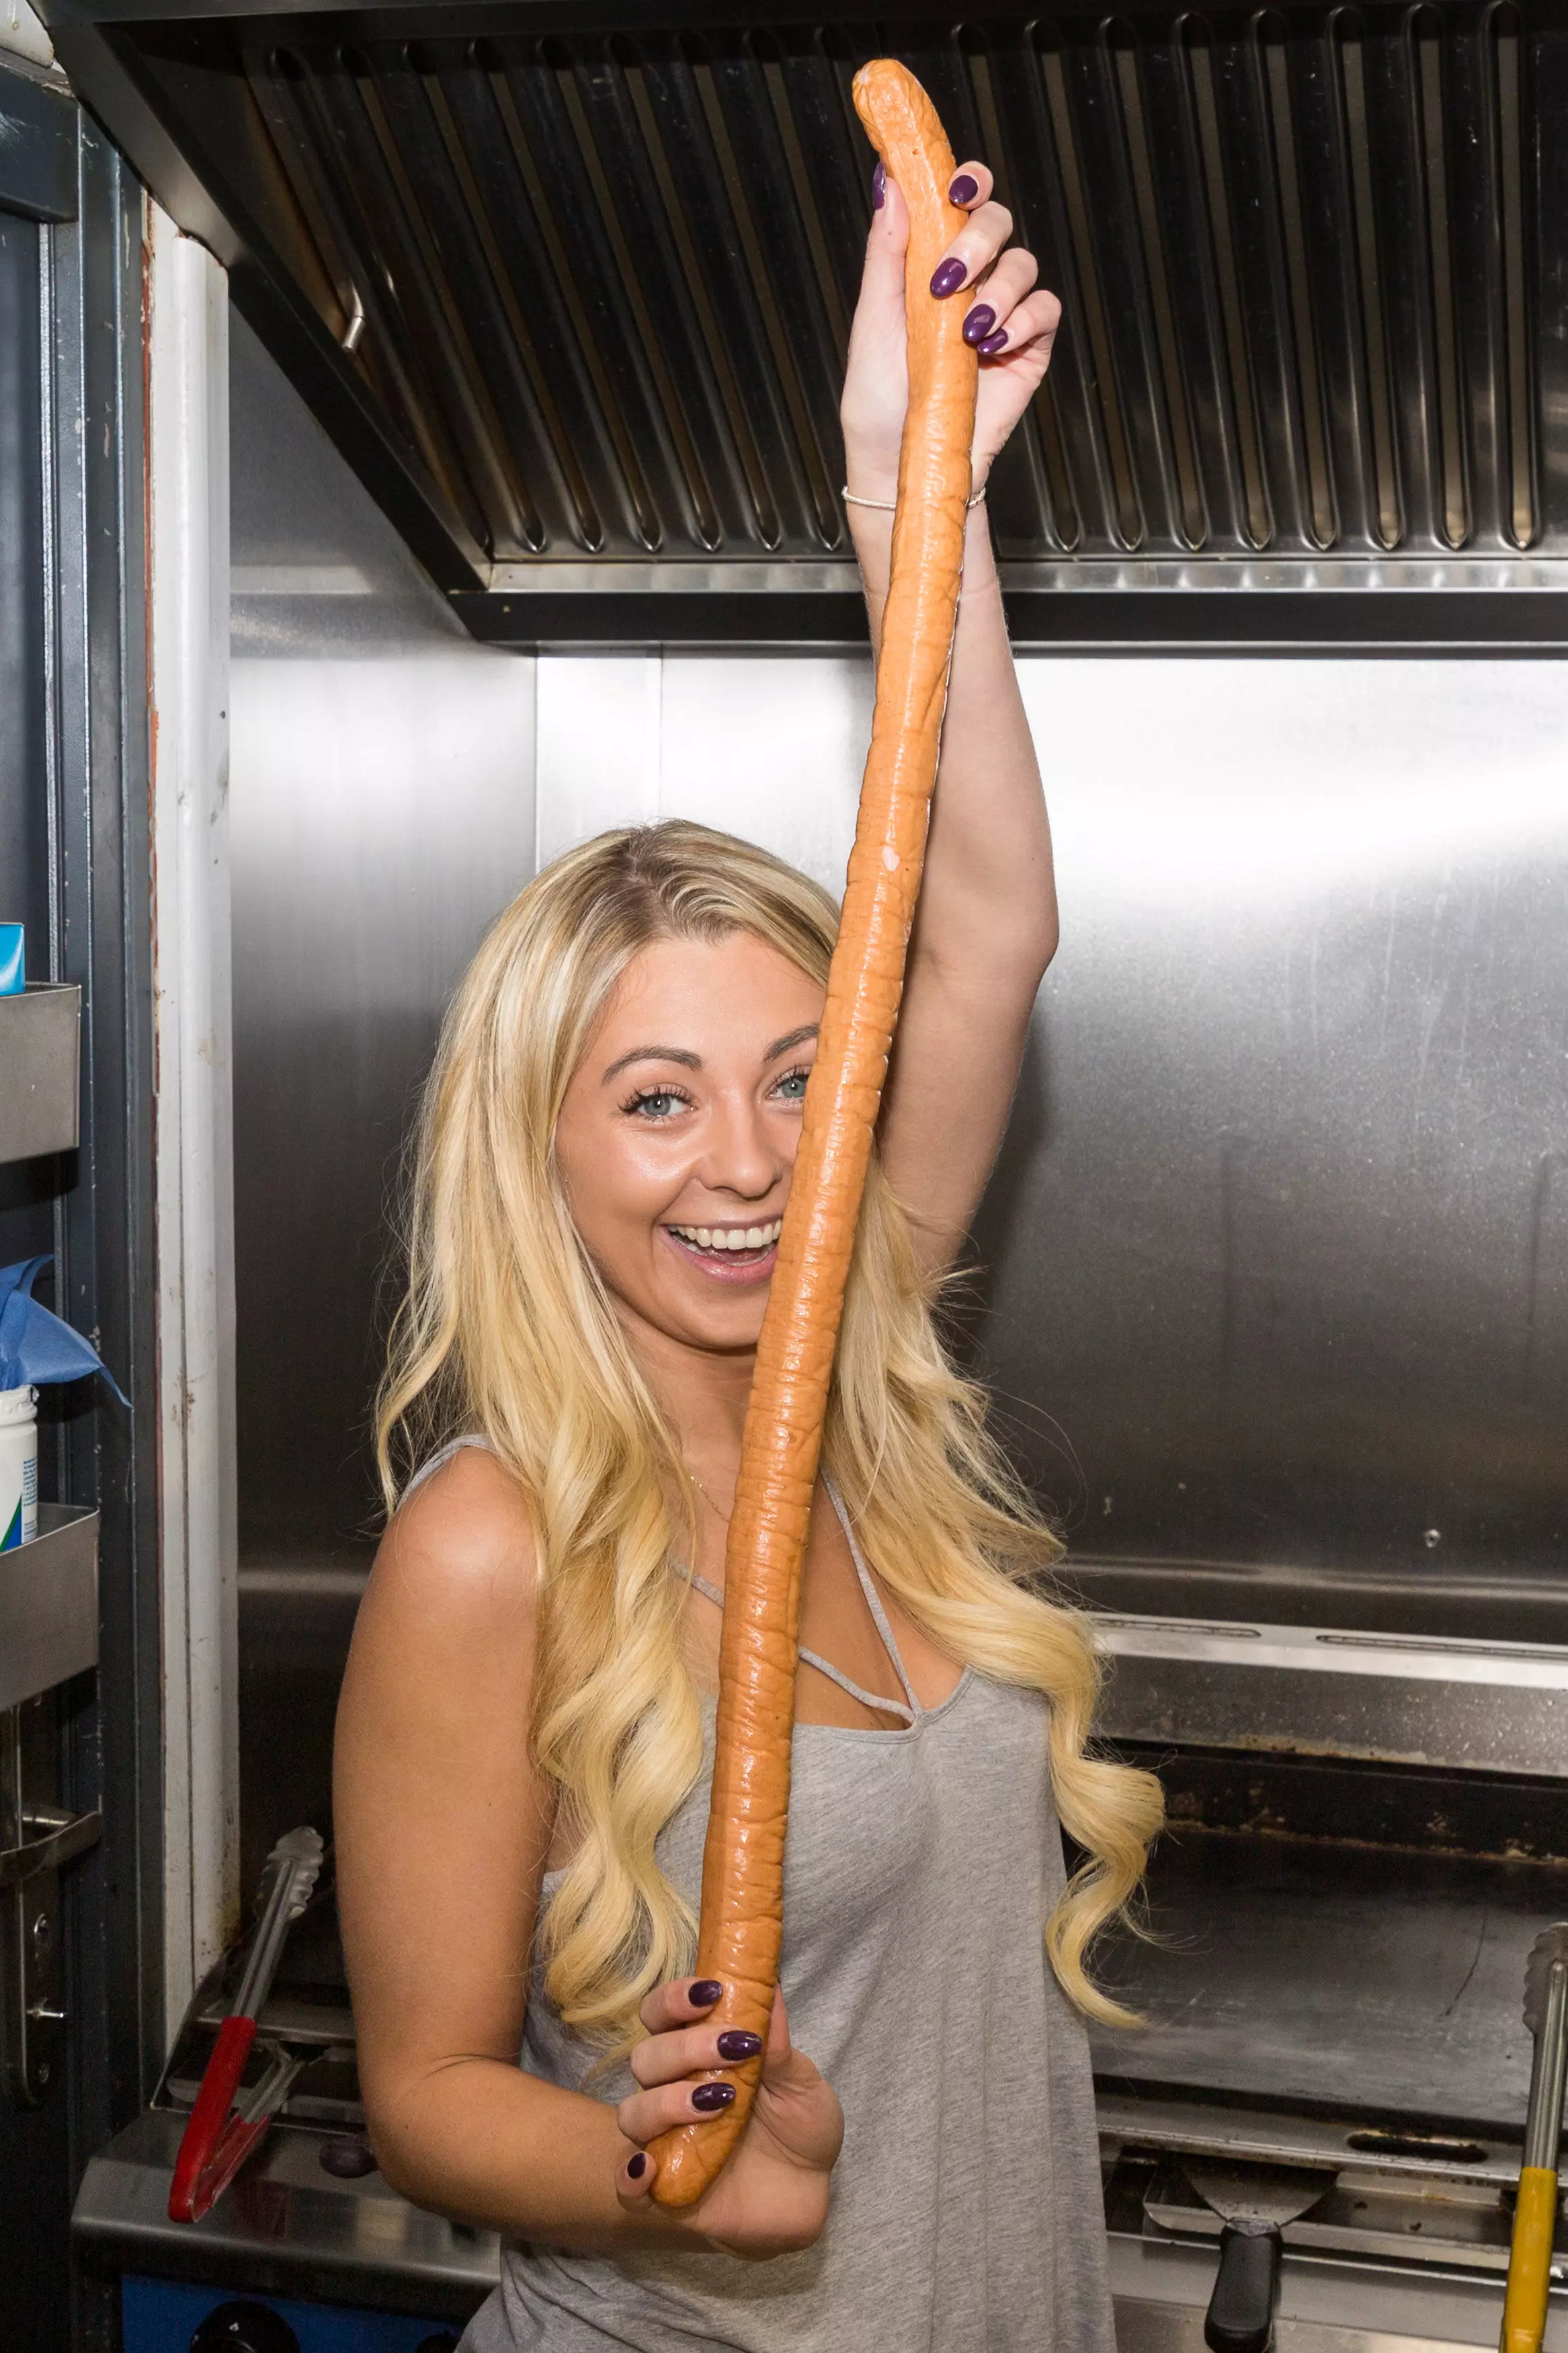 A food blogger has taken on her lengthiest challenge to date and devoured Britain's biggest hotdog. (